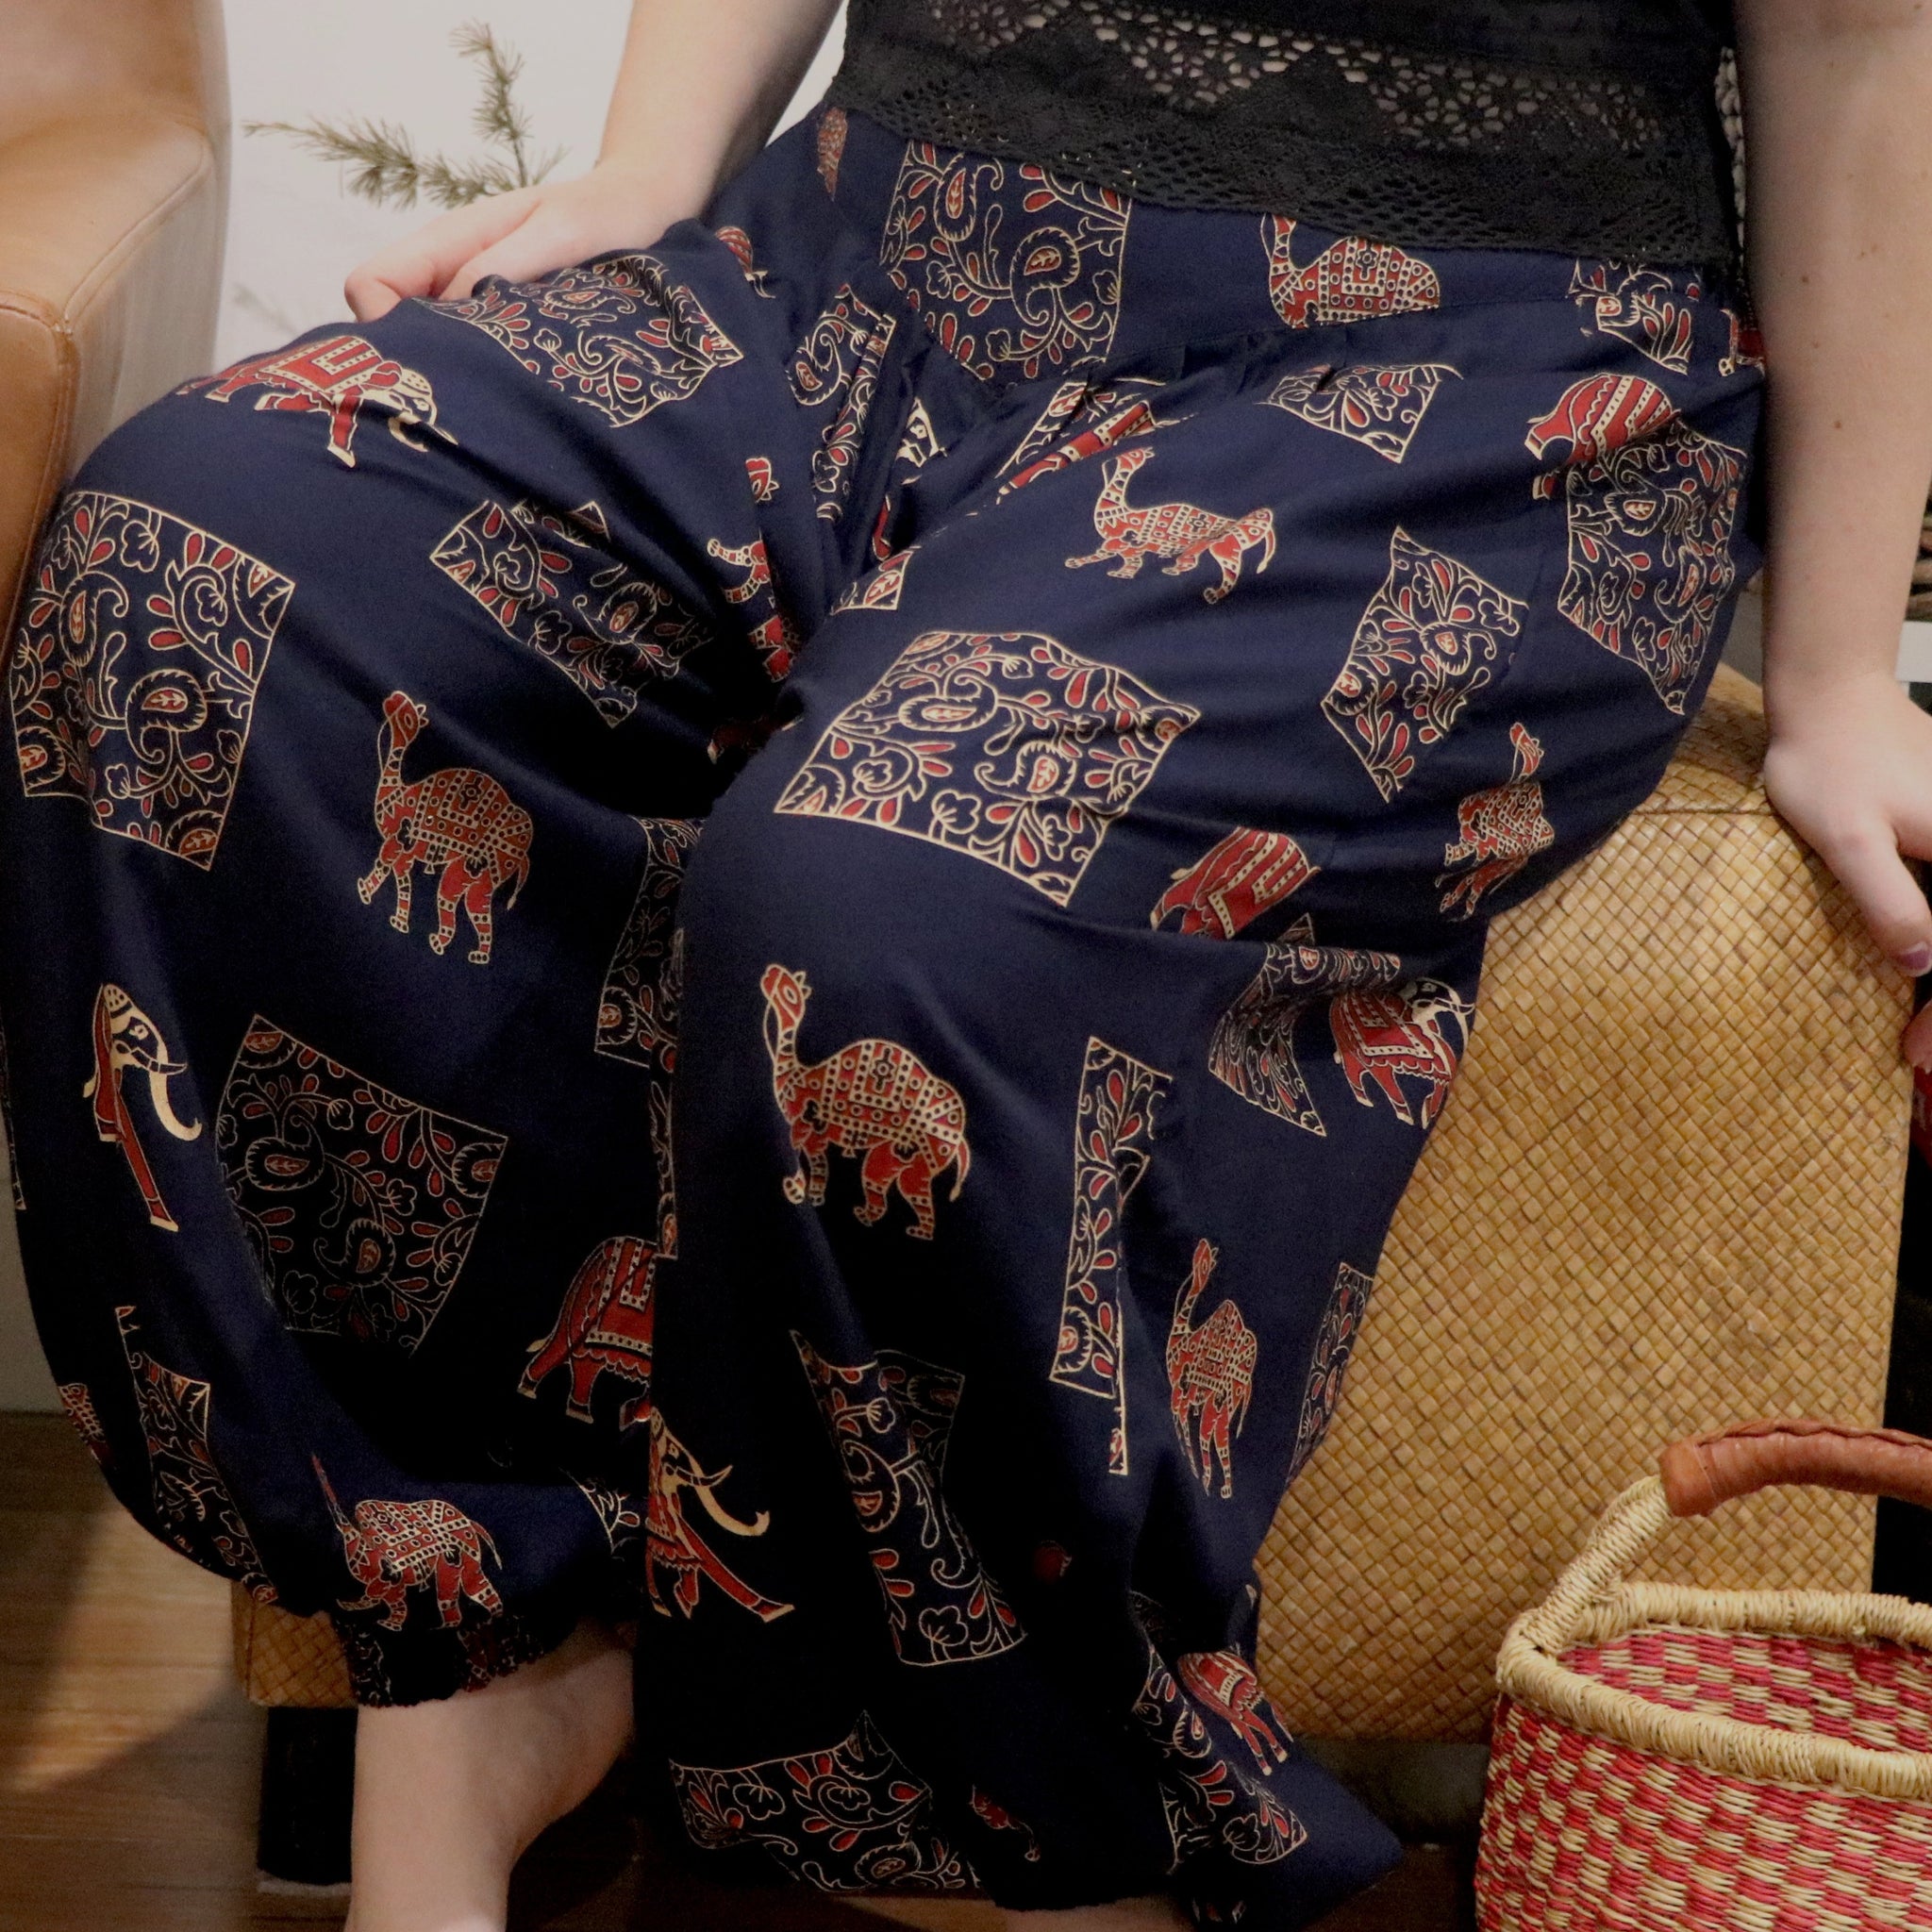 Fair Trade Patterned "Hippy" Pants